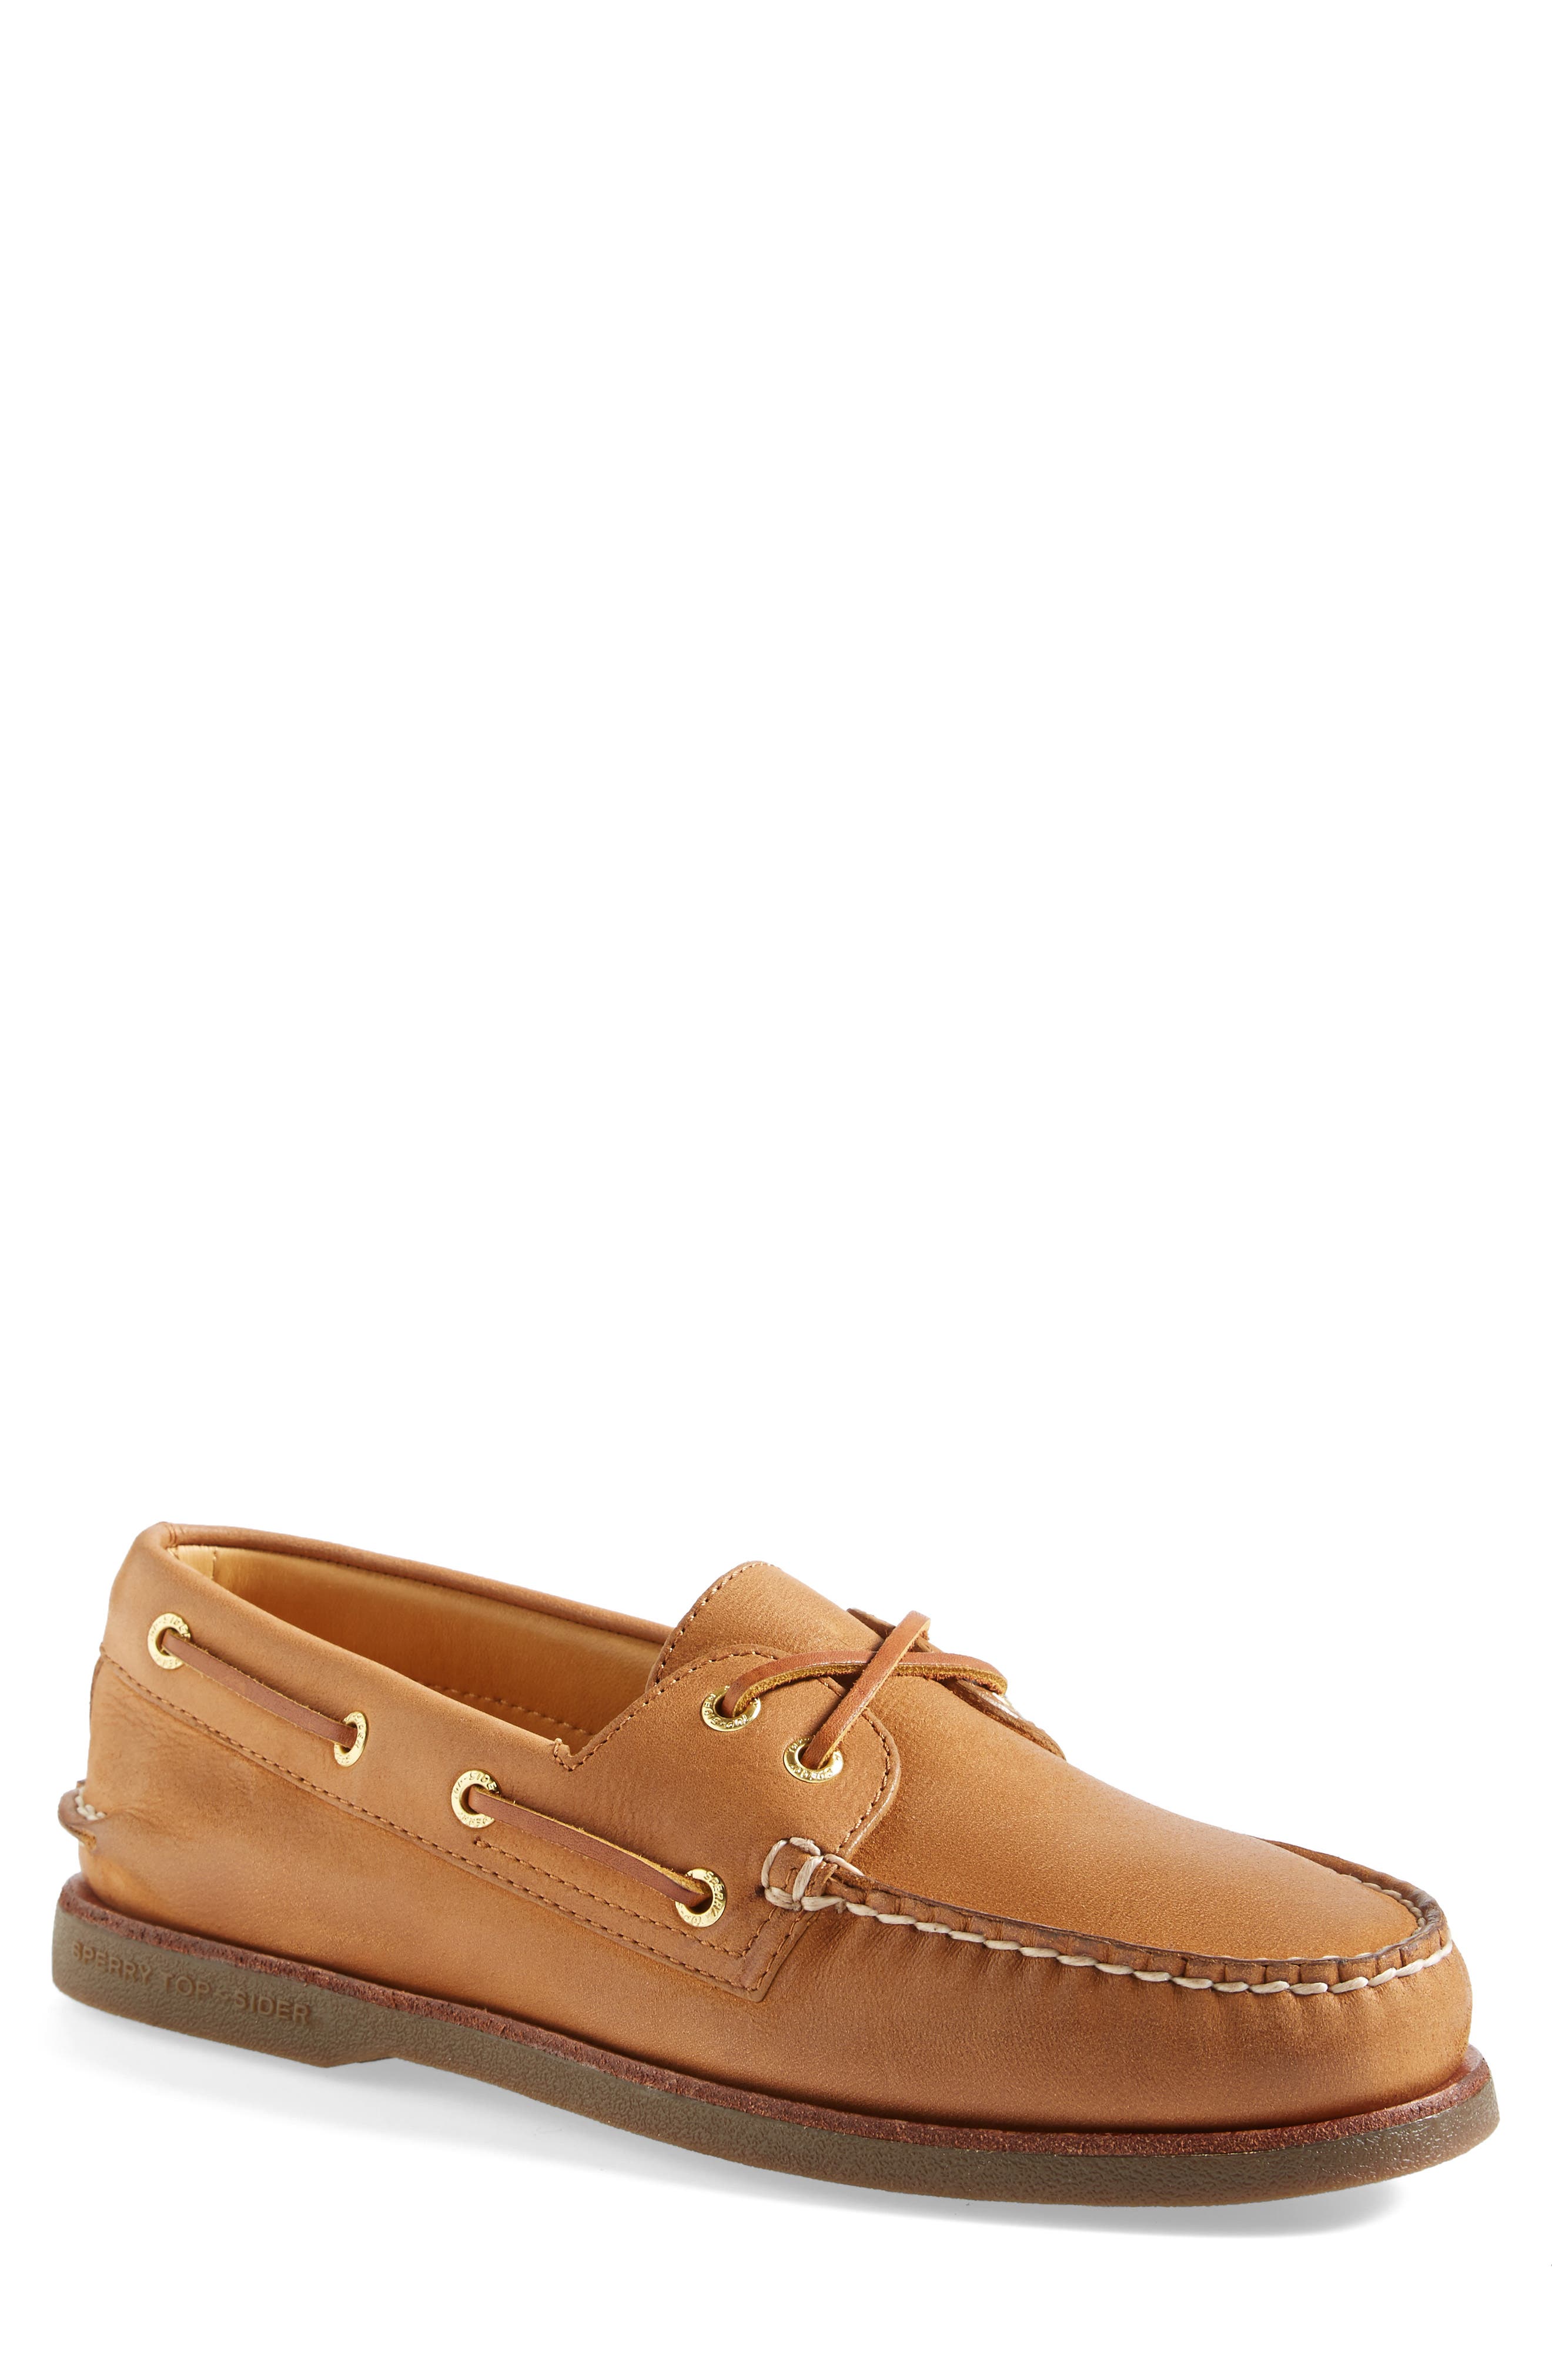 men's sperry boat shoes on sale